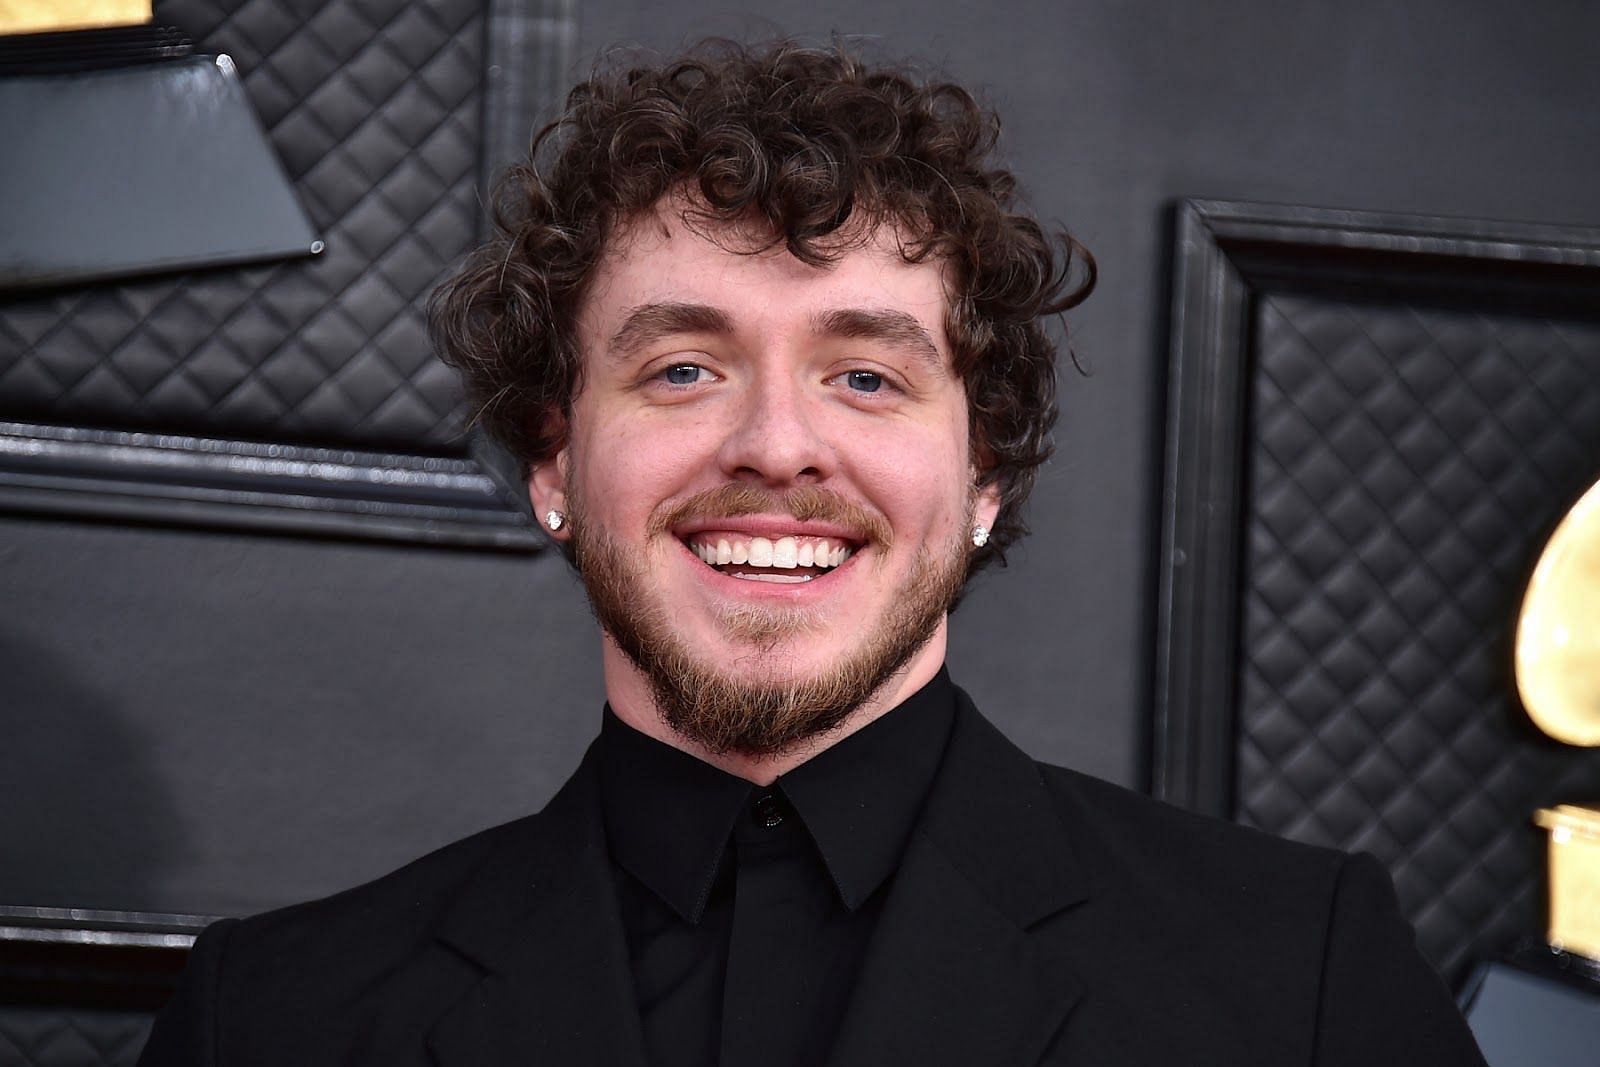 Jack Harlow's Age, Bio, Net Worth, Career, Personal Life and FAQs